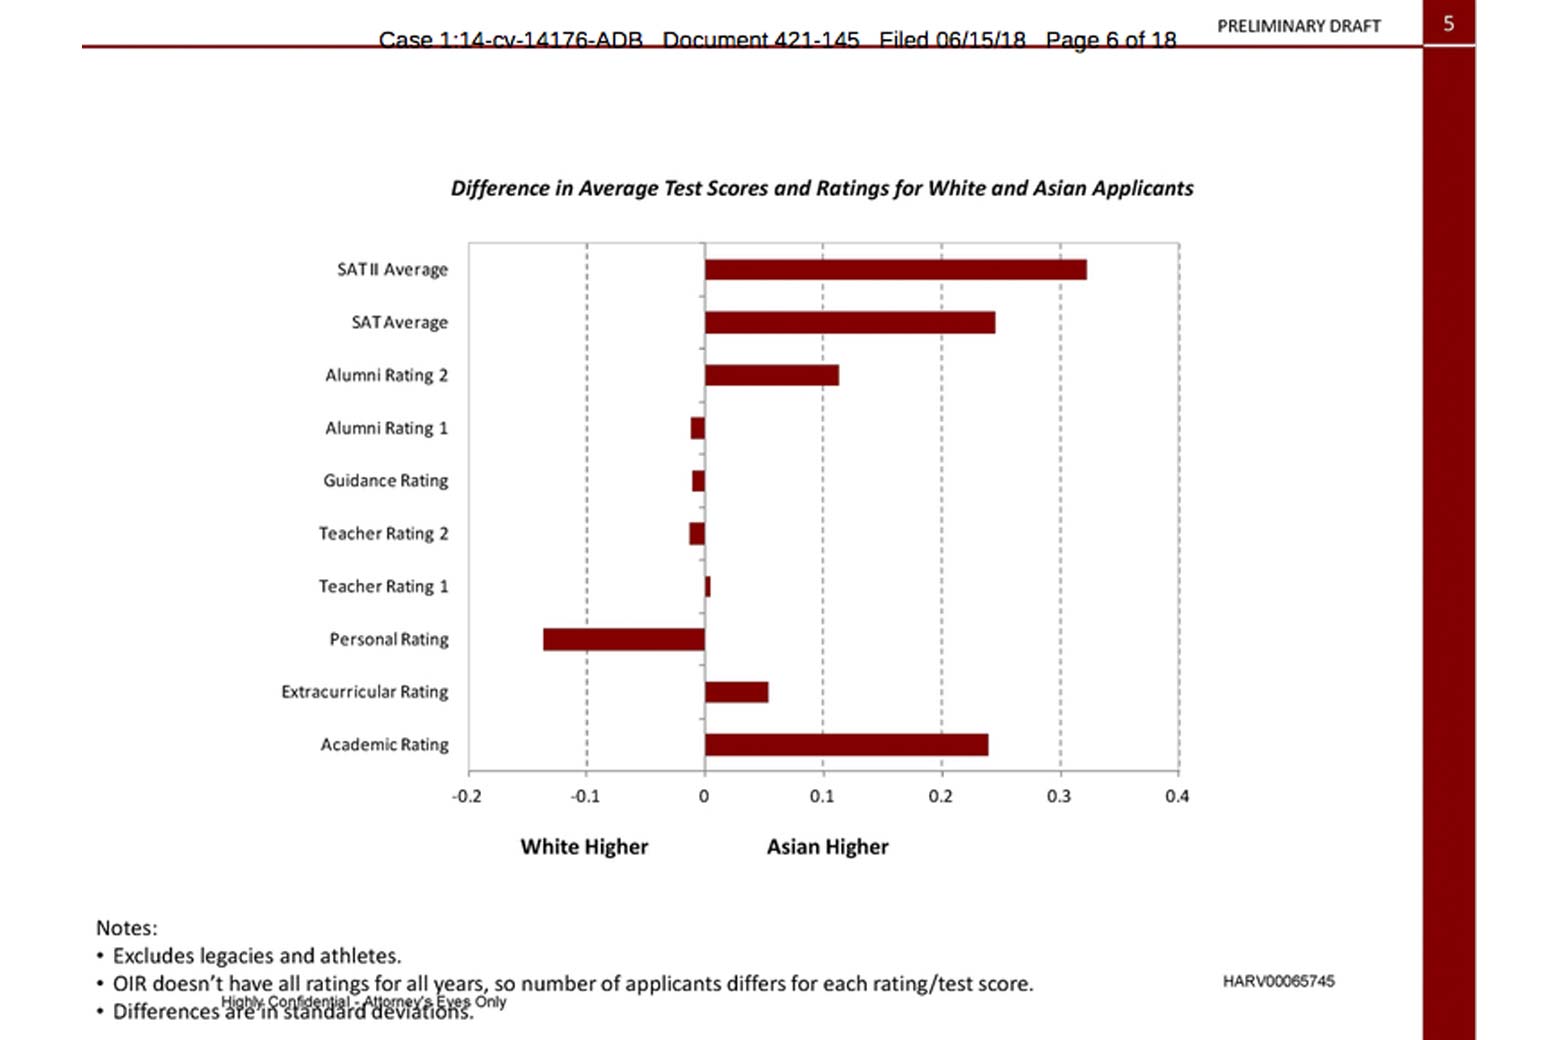 Difference in average test scores and ratings for white and asian applicants